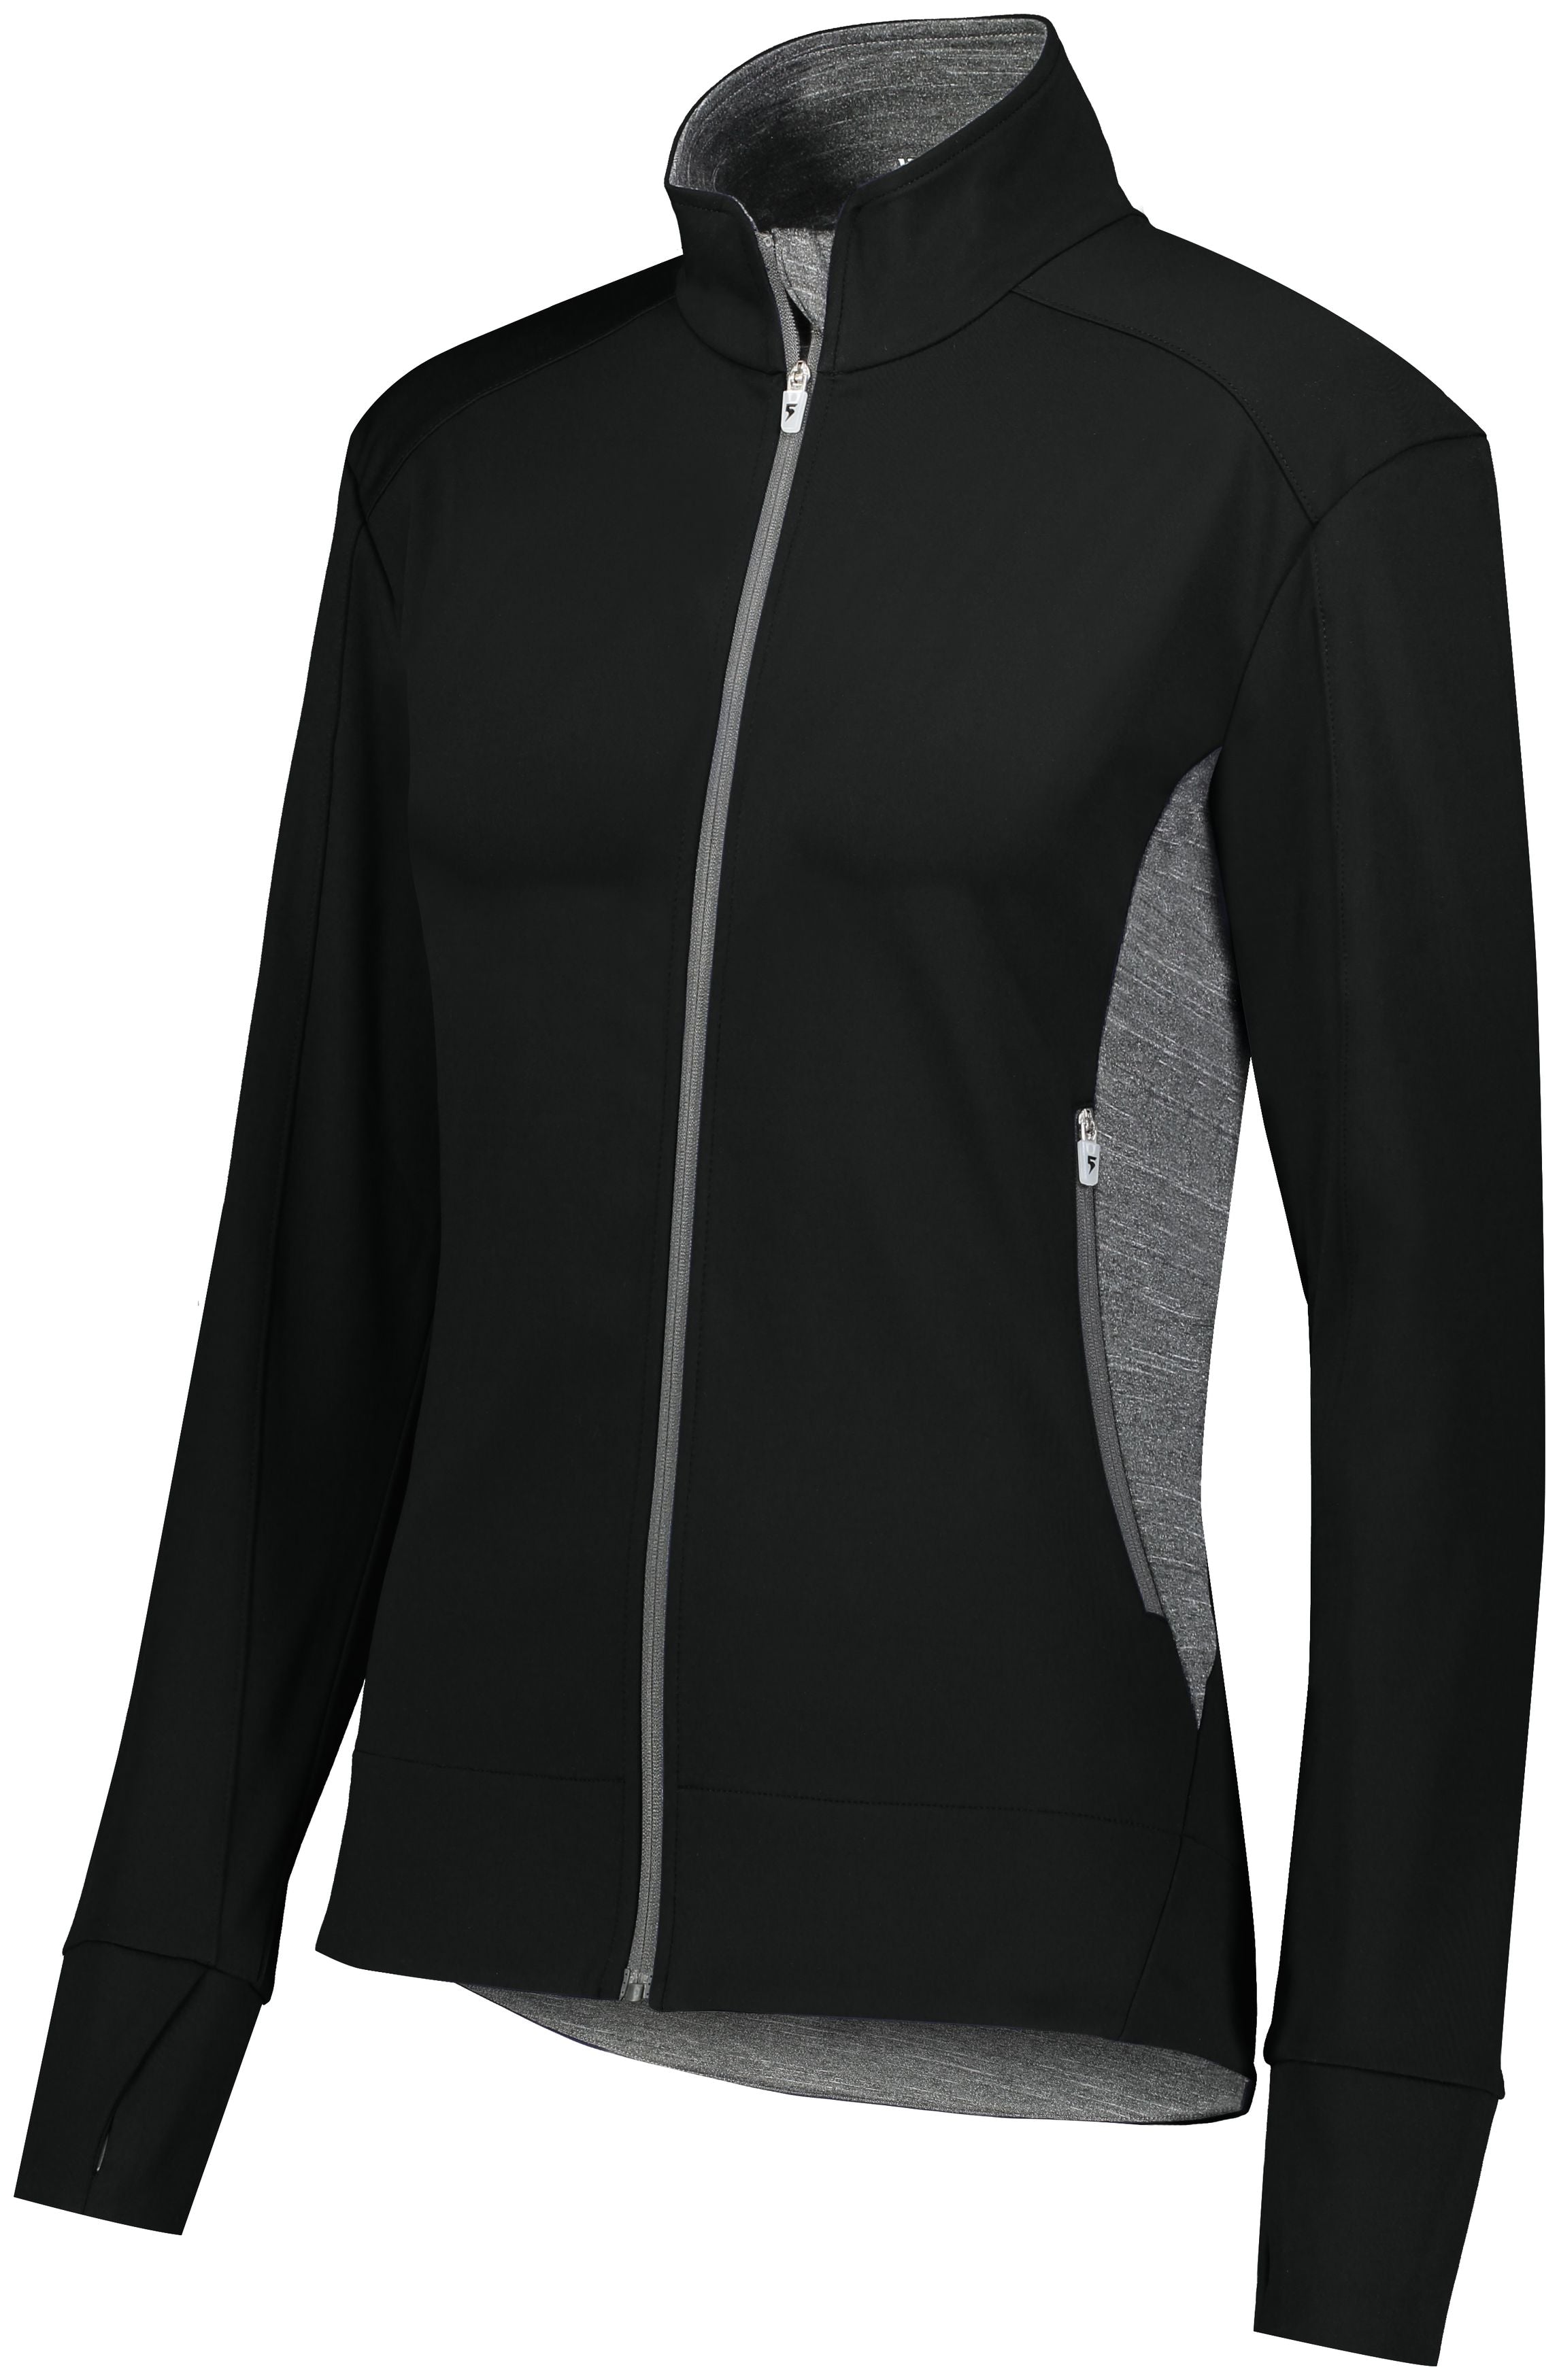 High 5 Ladies Free Form Jacket in Black/Carbon Heather  -Part of the Ladies, Ladies-Jacket, High5-Products, Outerwear product lines at KanaleyCreations.com